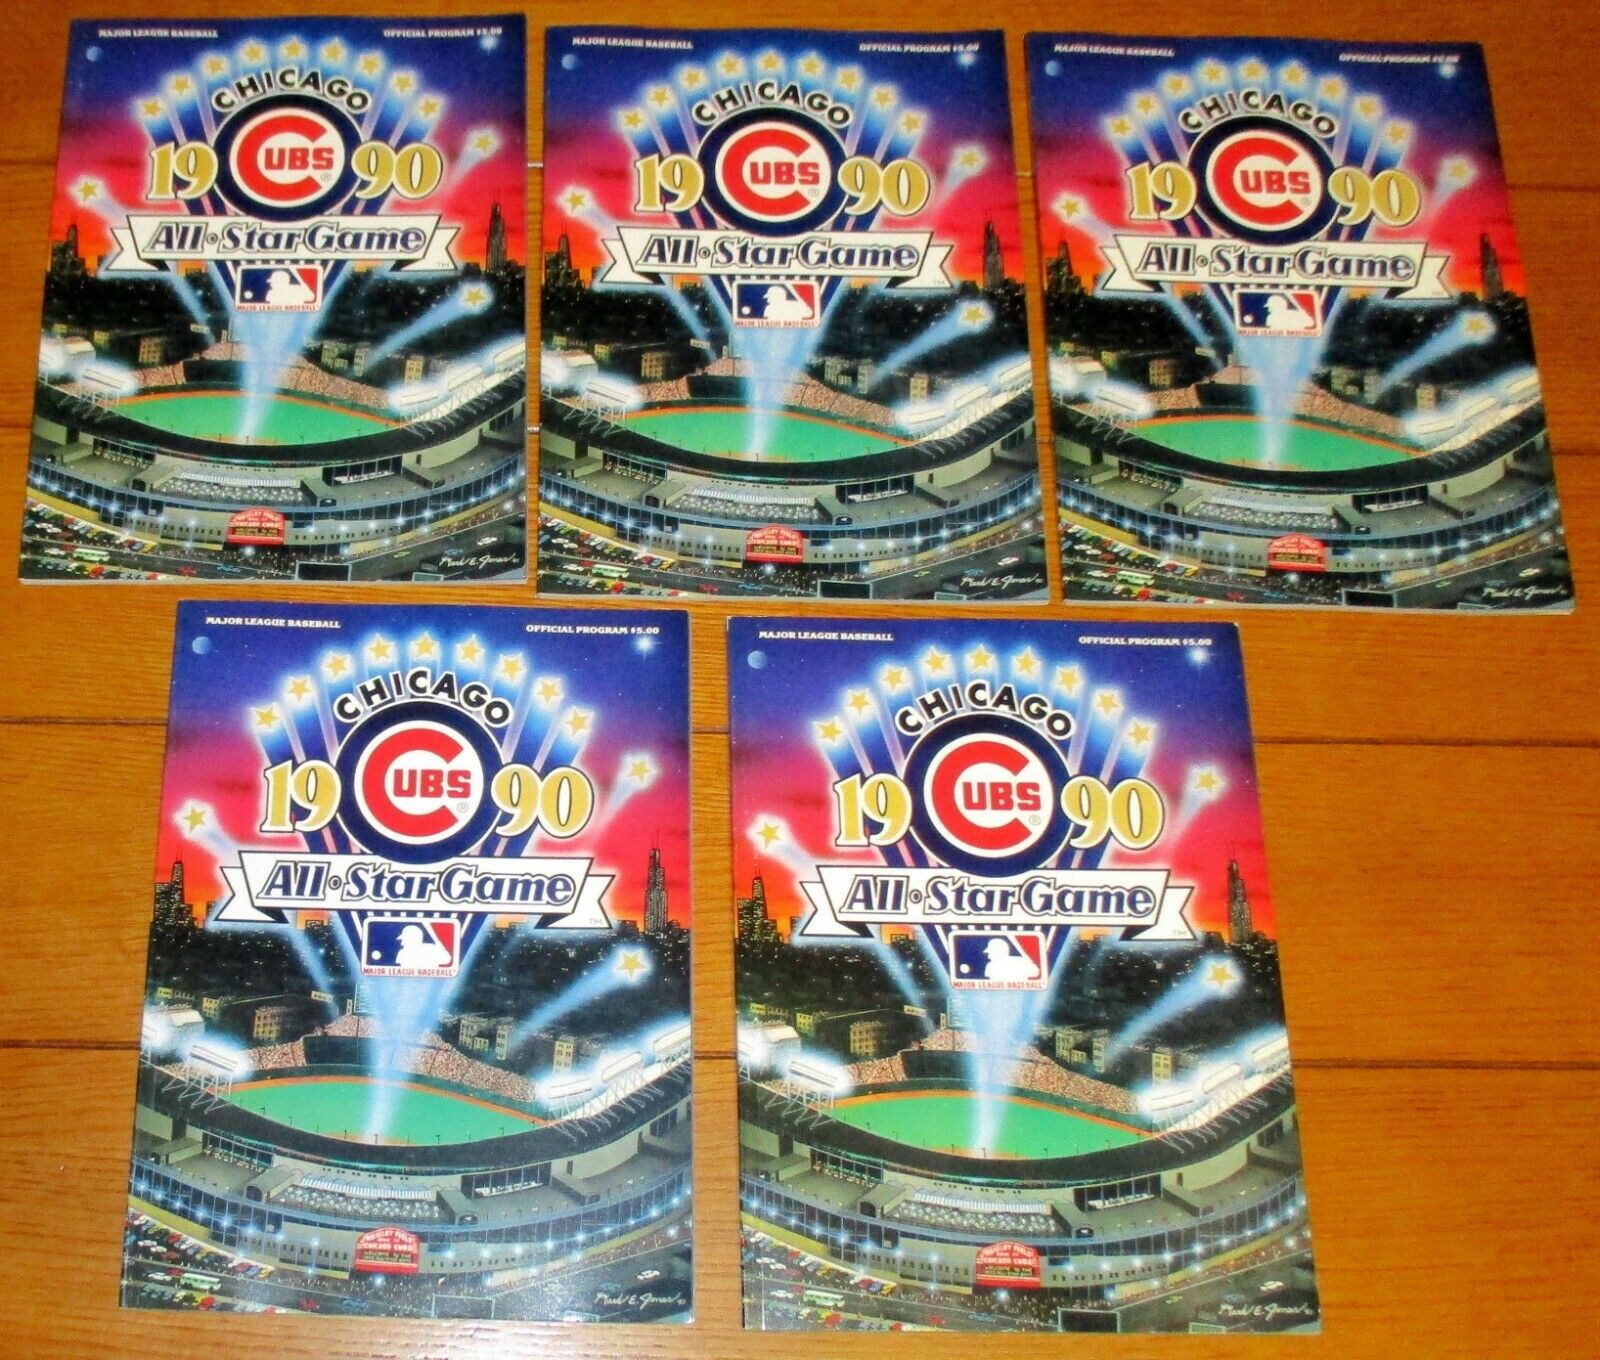 1990 Baseball All-Star Game Program Lot (5)  Chicago  Wrigley Field   96 Pages   Без бренда